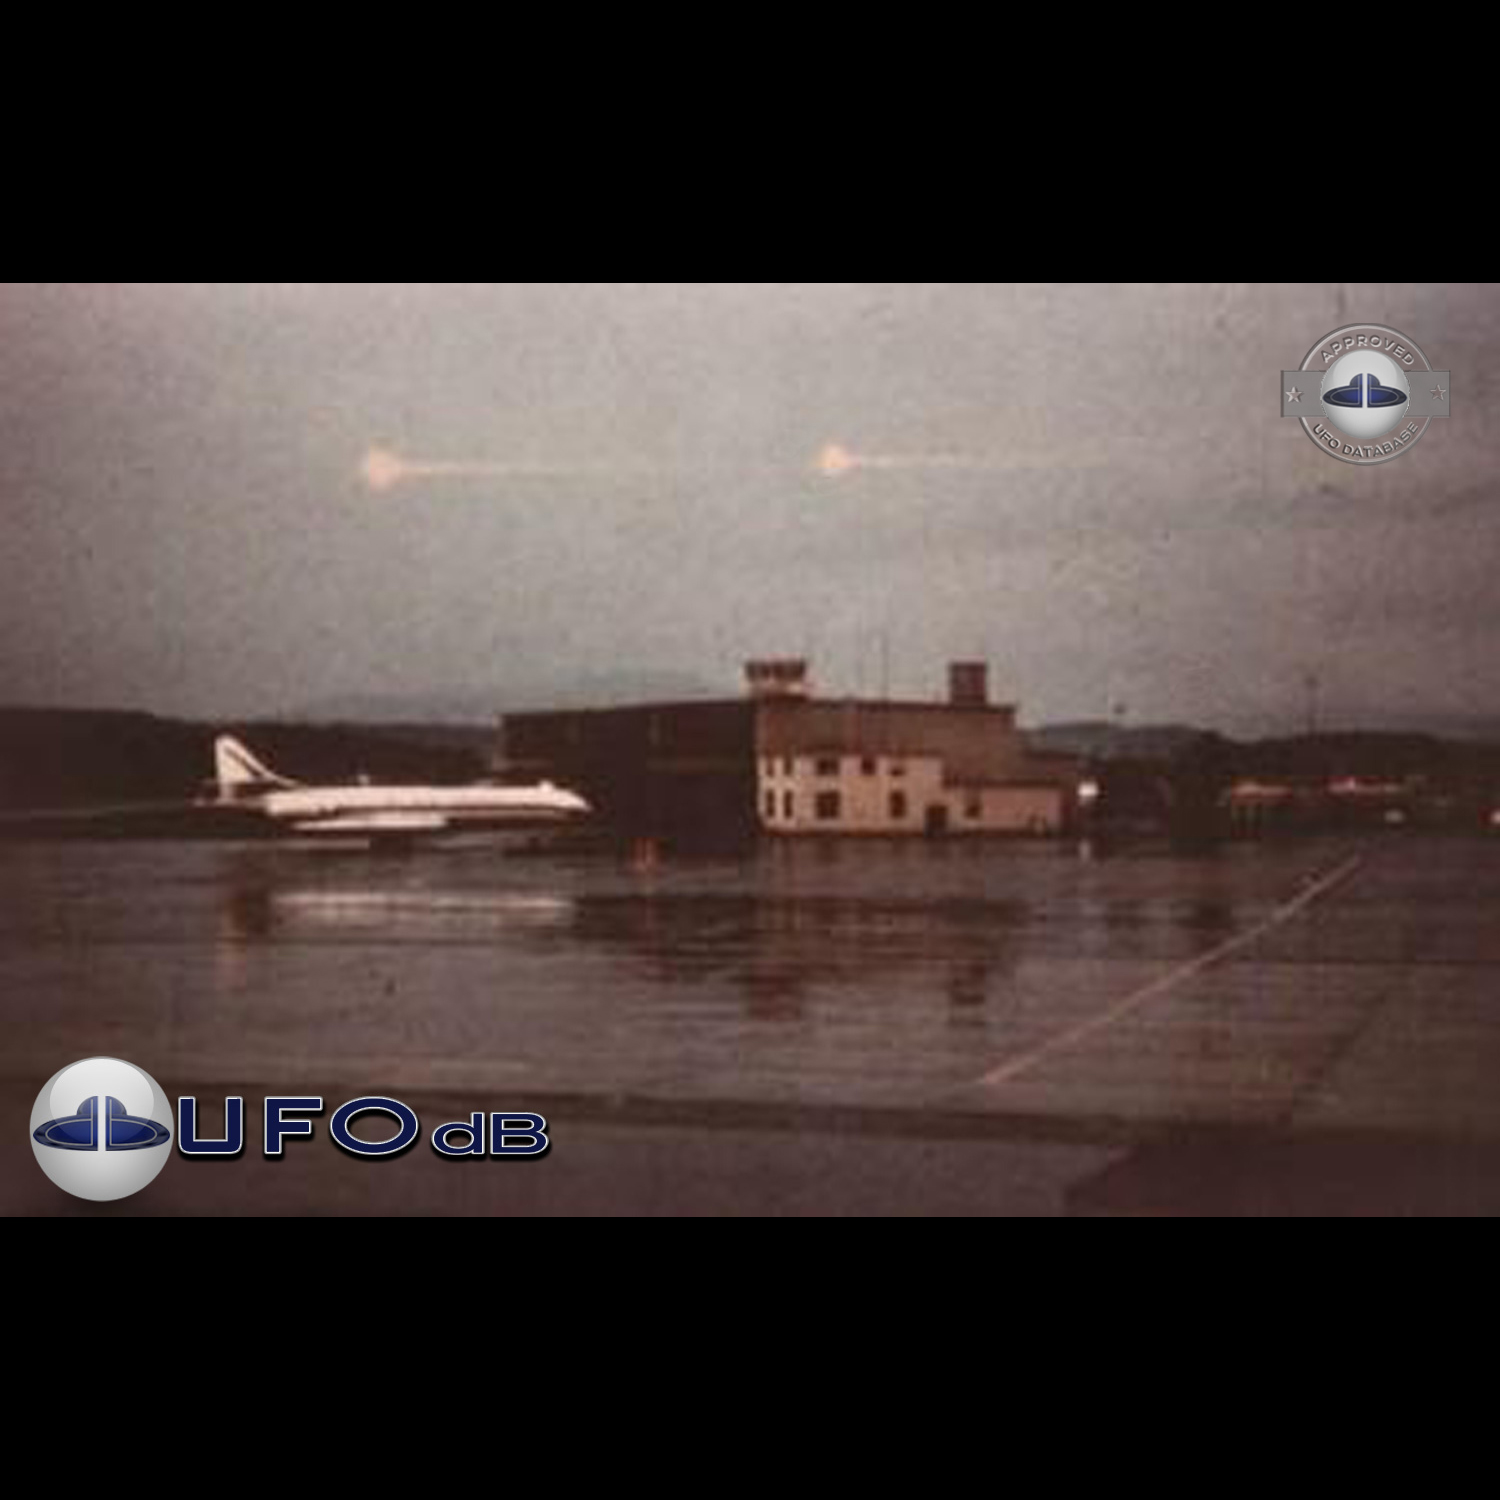 2 light red spheres over control tower of the Zurich-Kloten Airport UFO Picture #140-1